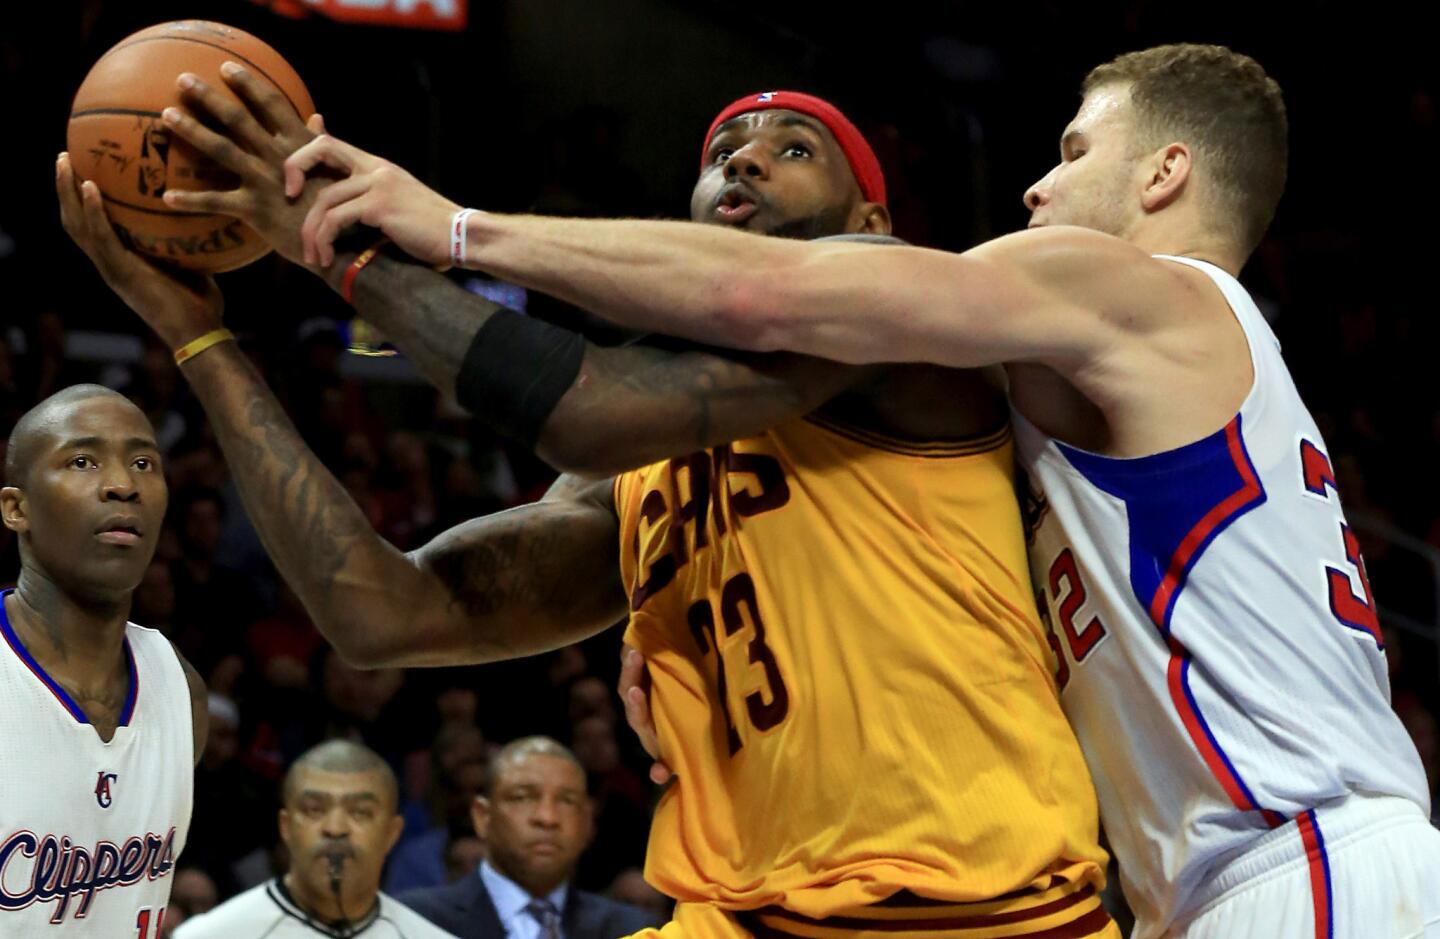 Cavaliers forward LeBron James is fouled on a drive to the basket by Clippers forward Blake Griffin in the fourth quarter Friday night at Staples Center.